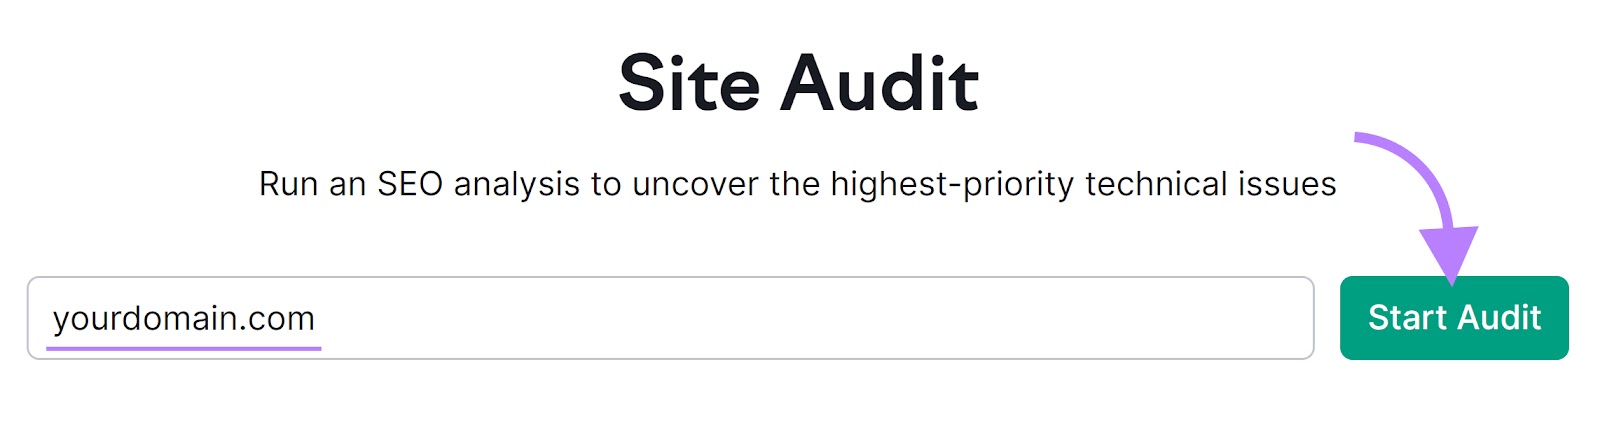 Site Audit tool with "yourdomain.com" in the text field and an arrow pointing to the "Start Audit" button.